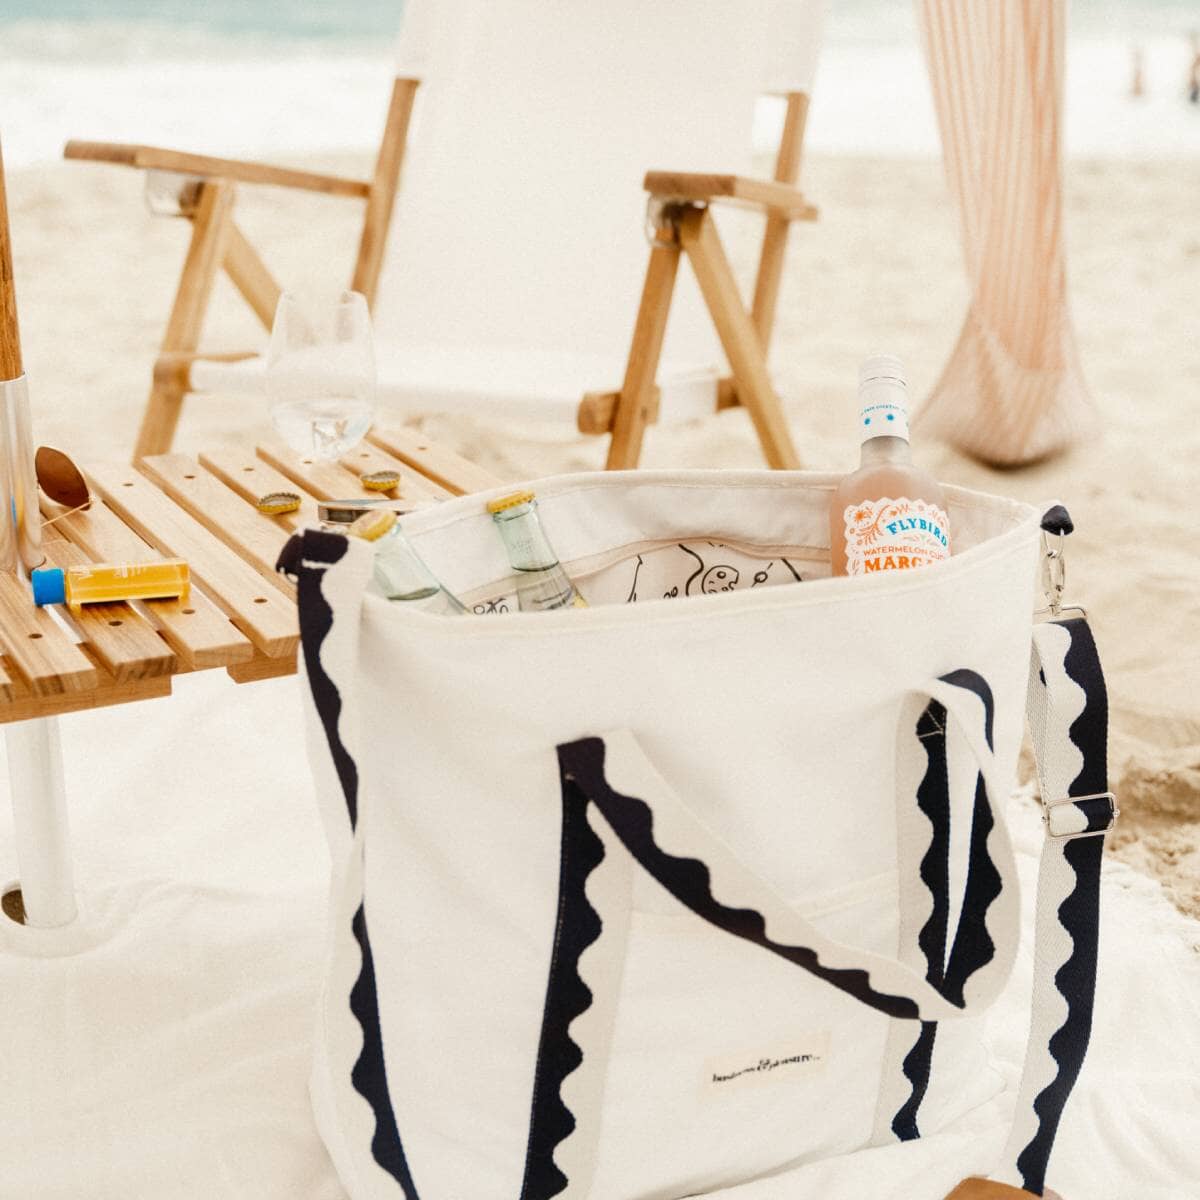 The Cooler Tote Bag - Rivie White Cooler Tote Business & Pleasure Co Aus 